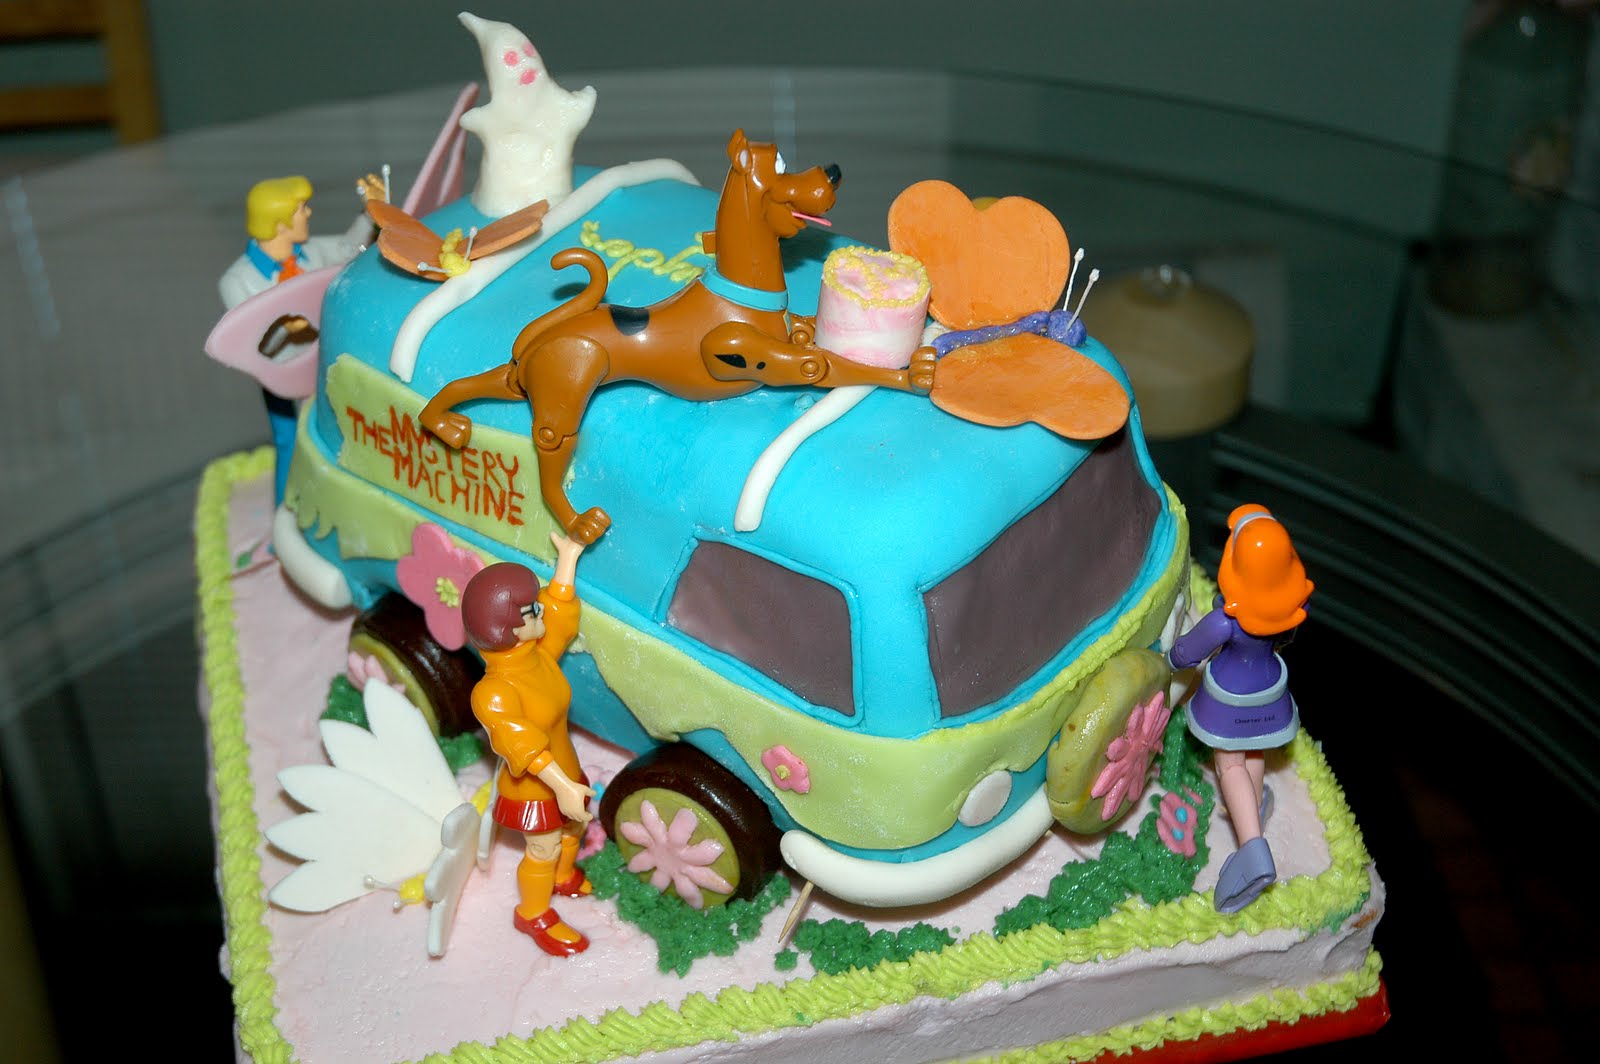 Scooby-Doo-Cakes-Images.jpg